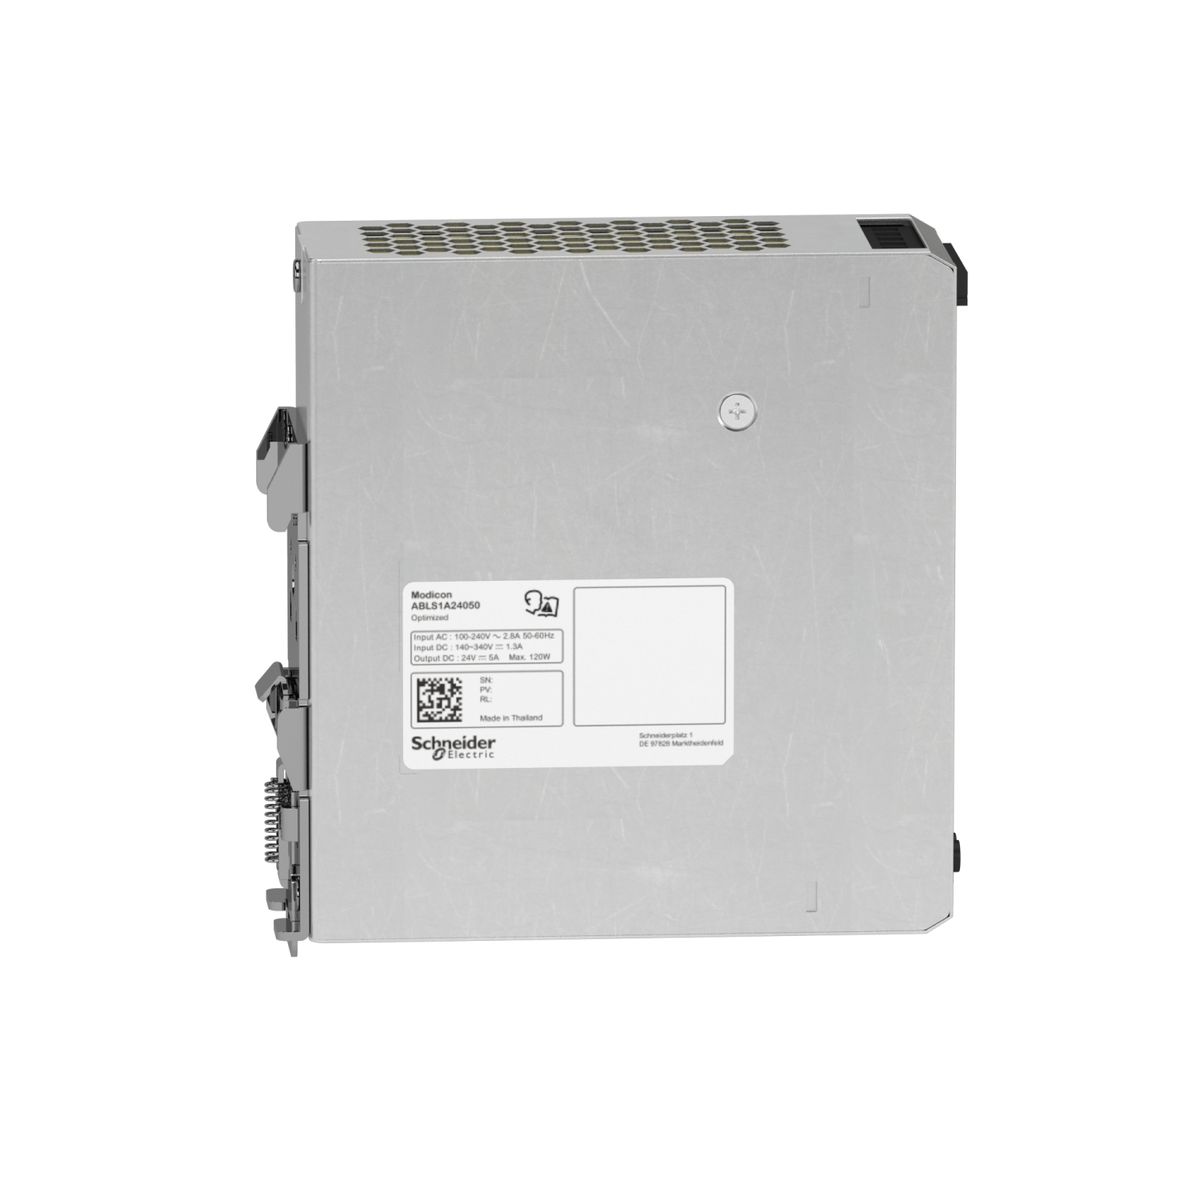 ABLS1A24050 - Modicon ABL - switching power supply - 5A - 100 to 240Vac single/two-phase - 24Vdc - Schneider Electric - 4